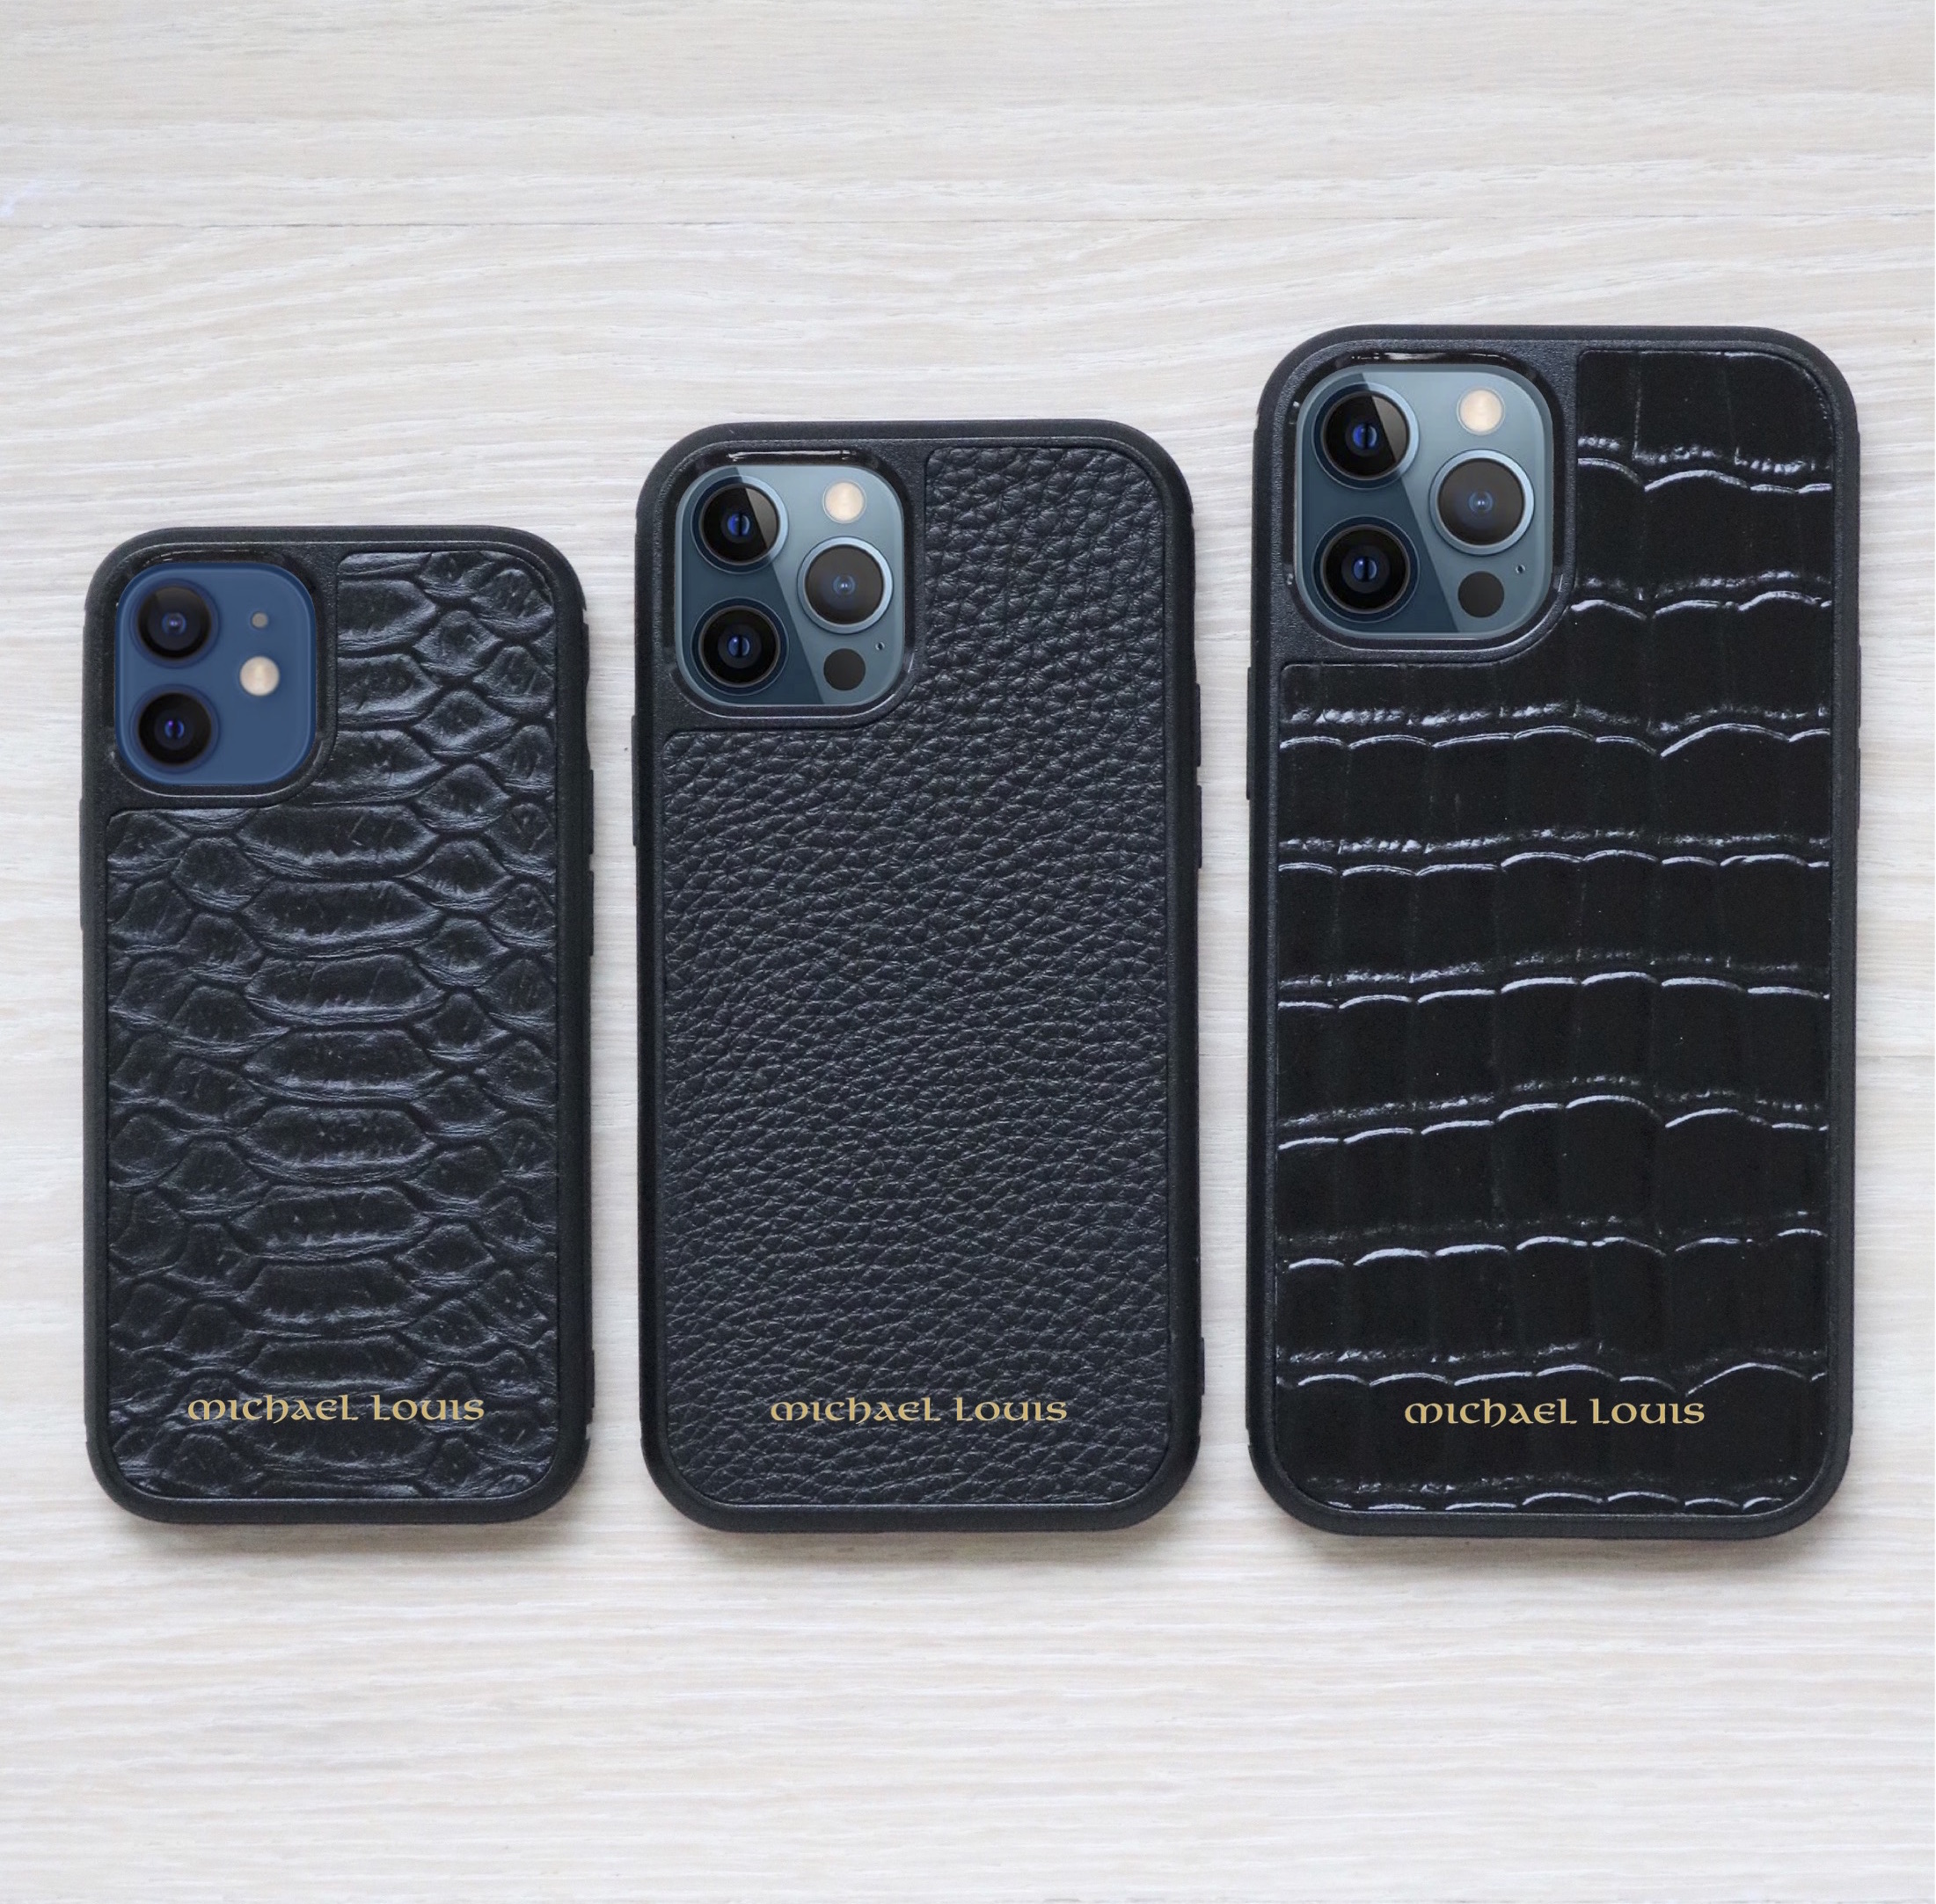 Michael Louis Releases New Iphone 12 Case Collection The Luxury Lifestyle Magazine